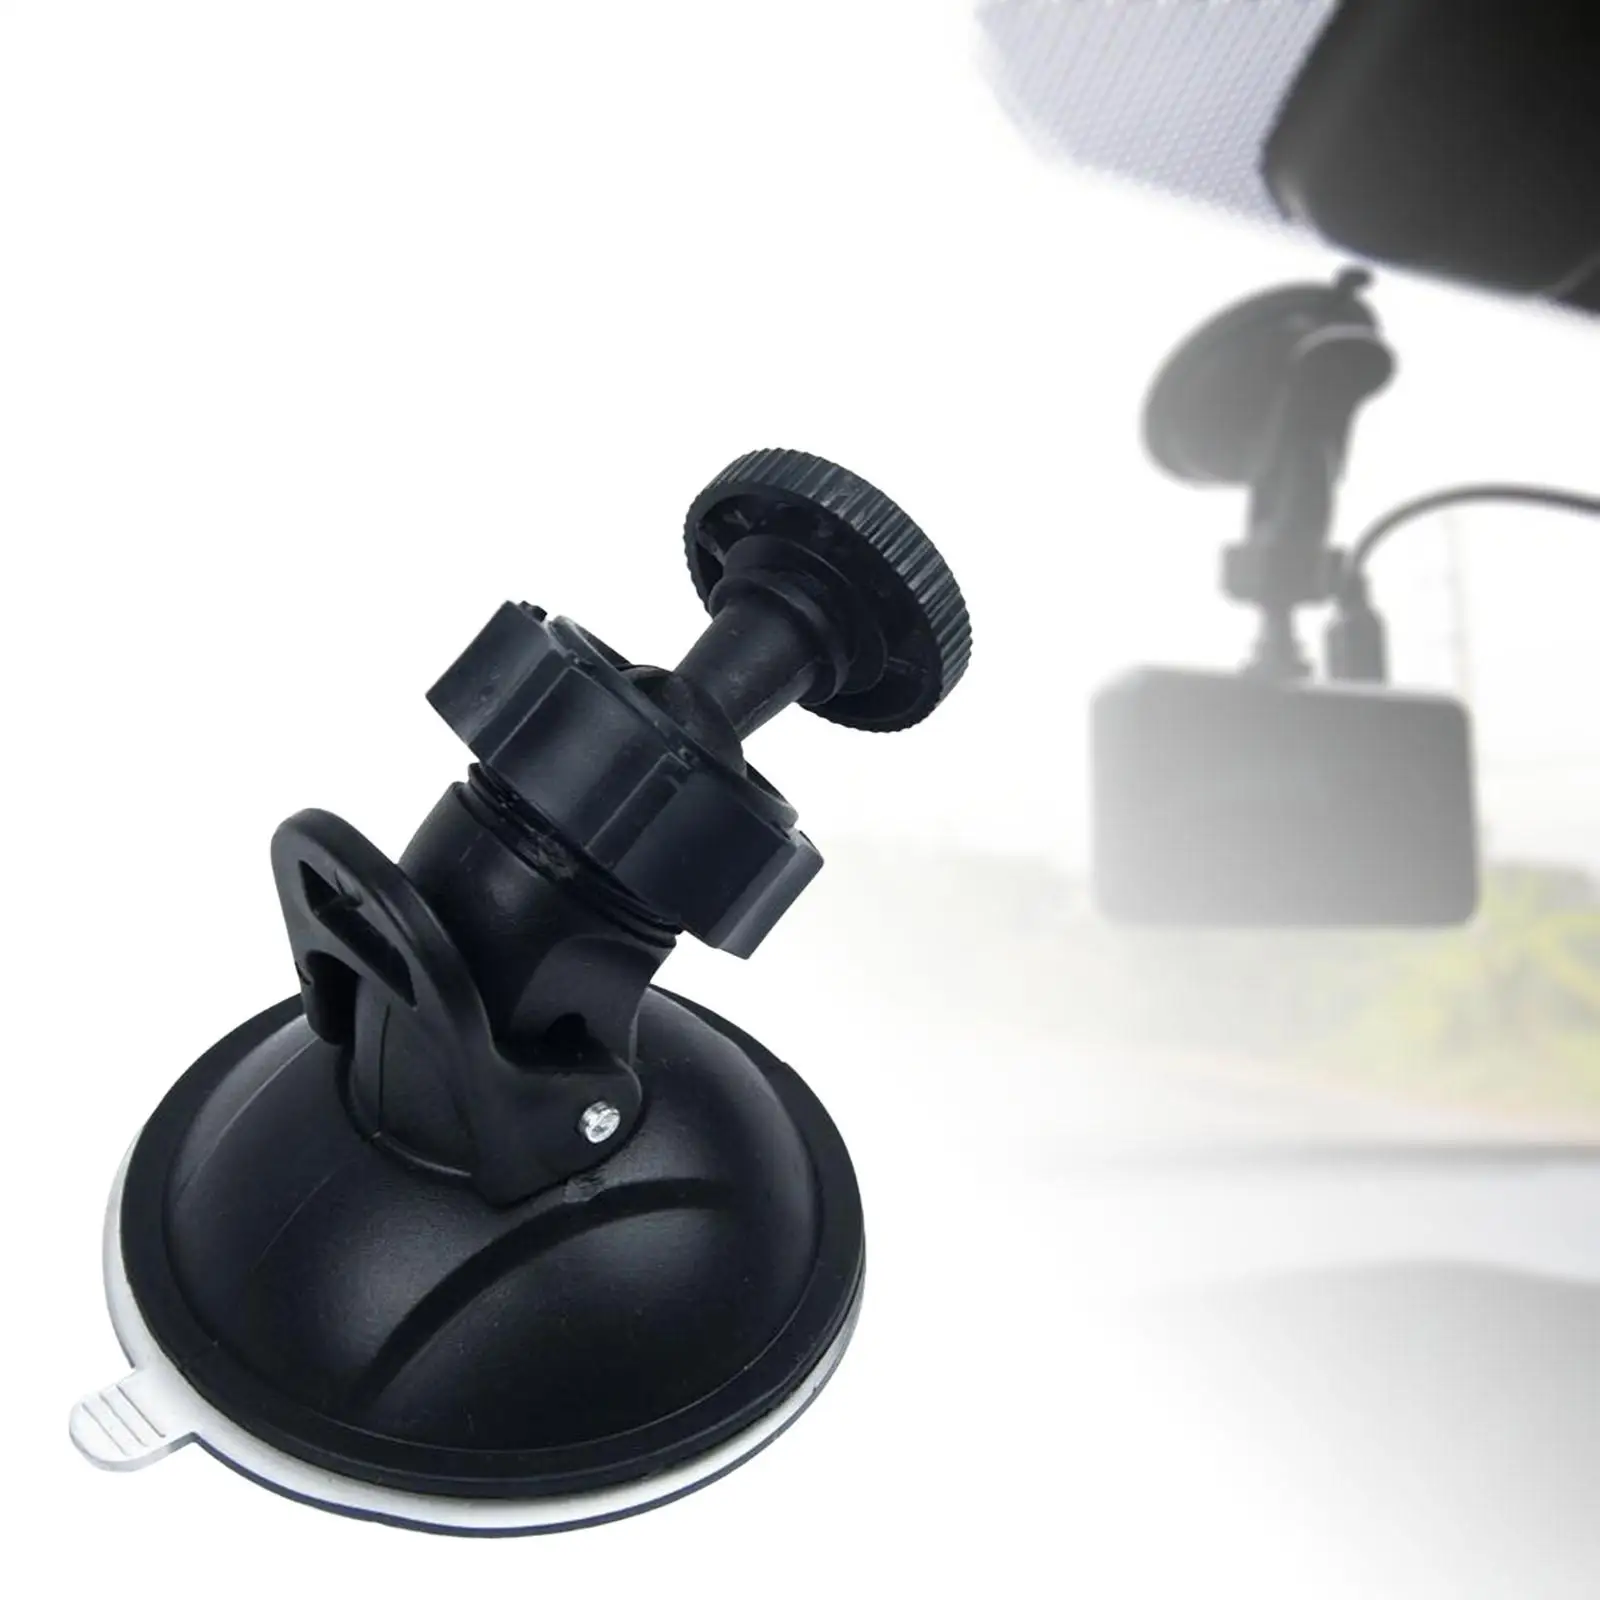 Dash cam Suction Cup Mount Car Video Recorder Holder Bracket Travel Driving